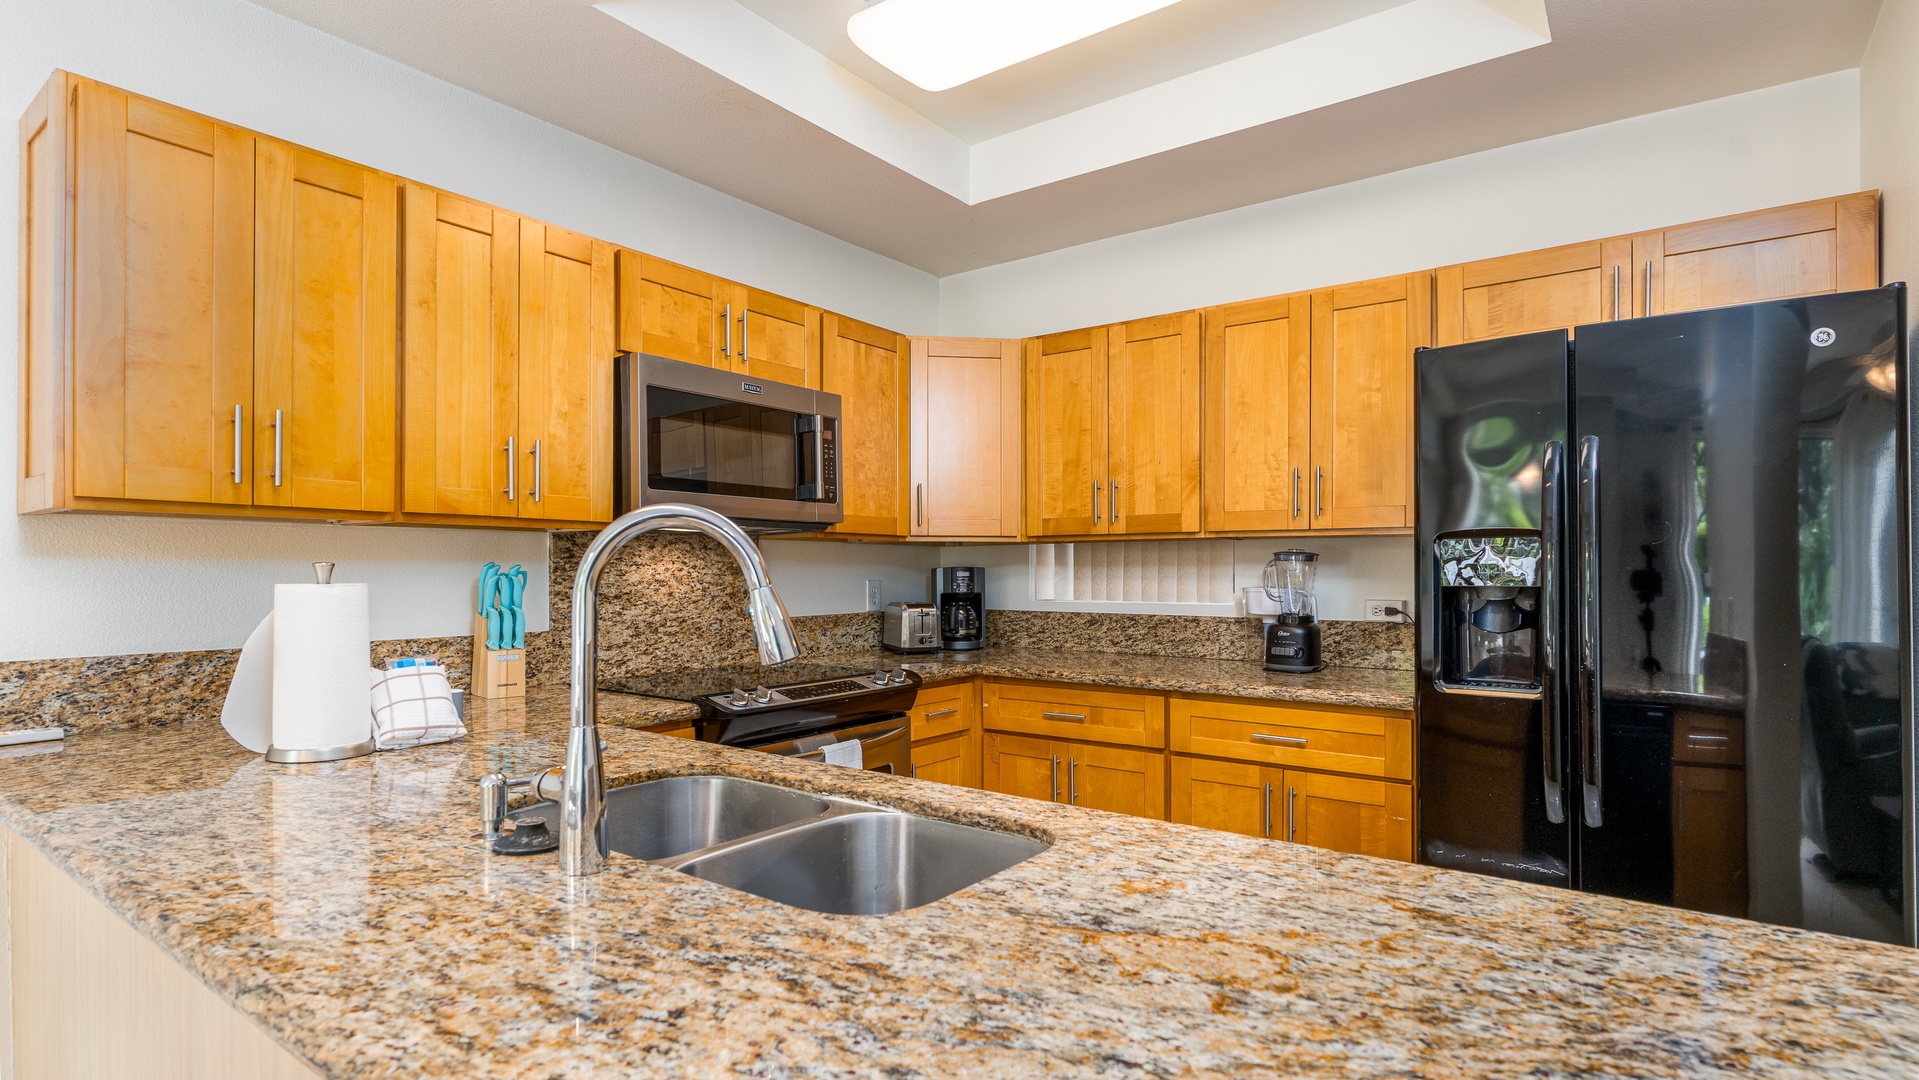 Kapolei Vacation Rentals, Fairways at Ko Olina 27H - Gracious amenities for your culinary adventures in the kitchen.